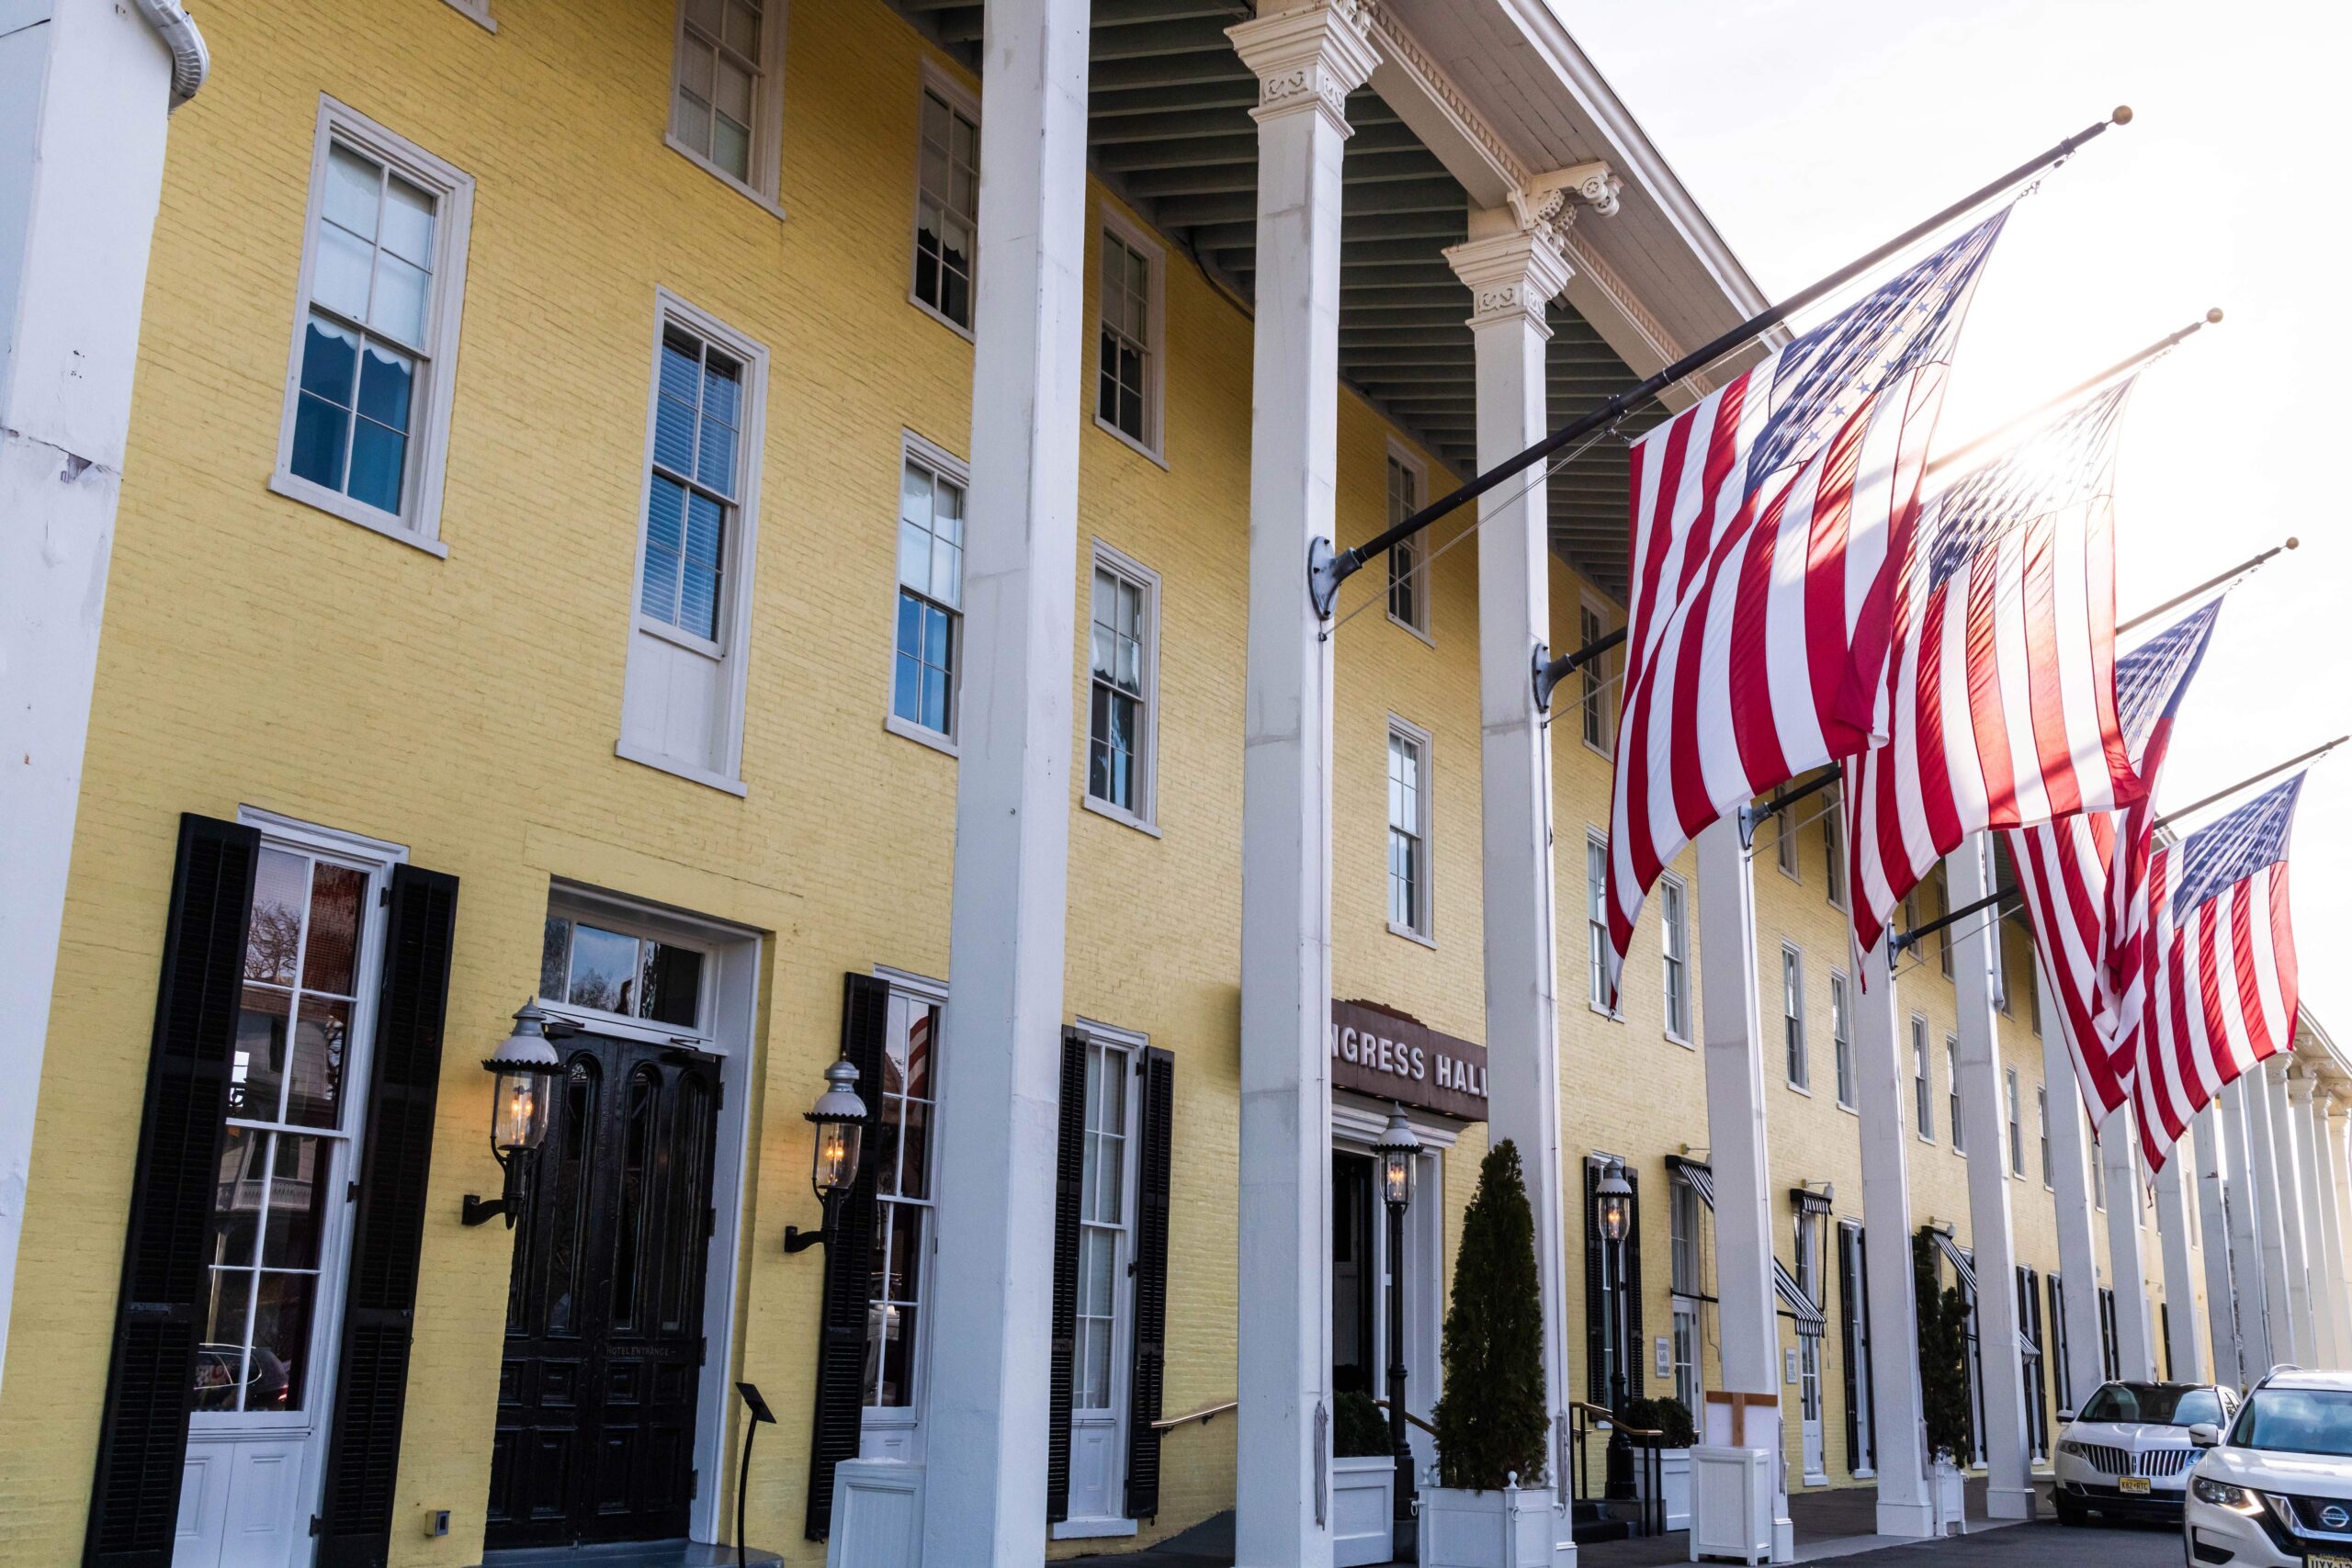 Sunshine streaming through American Flags hanging at Congress Hall, a yellow Victorian style hotel